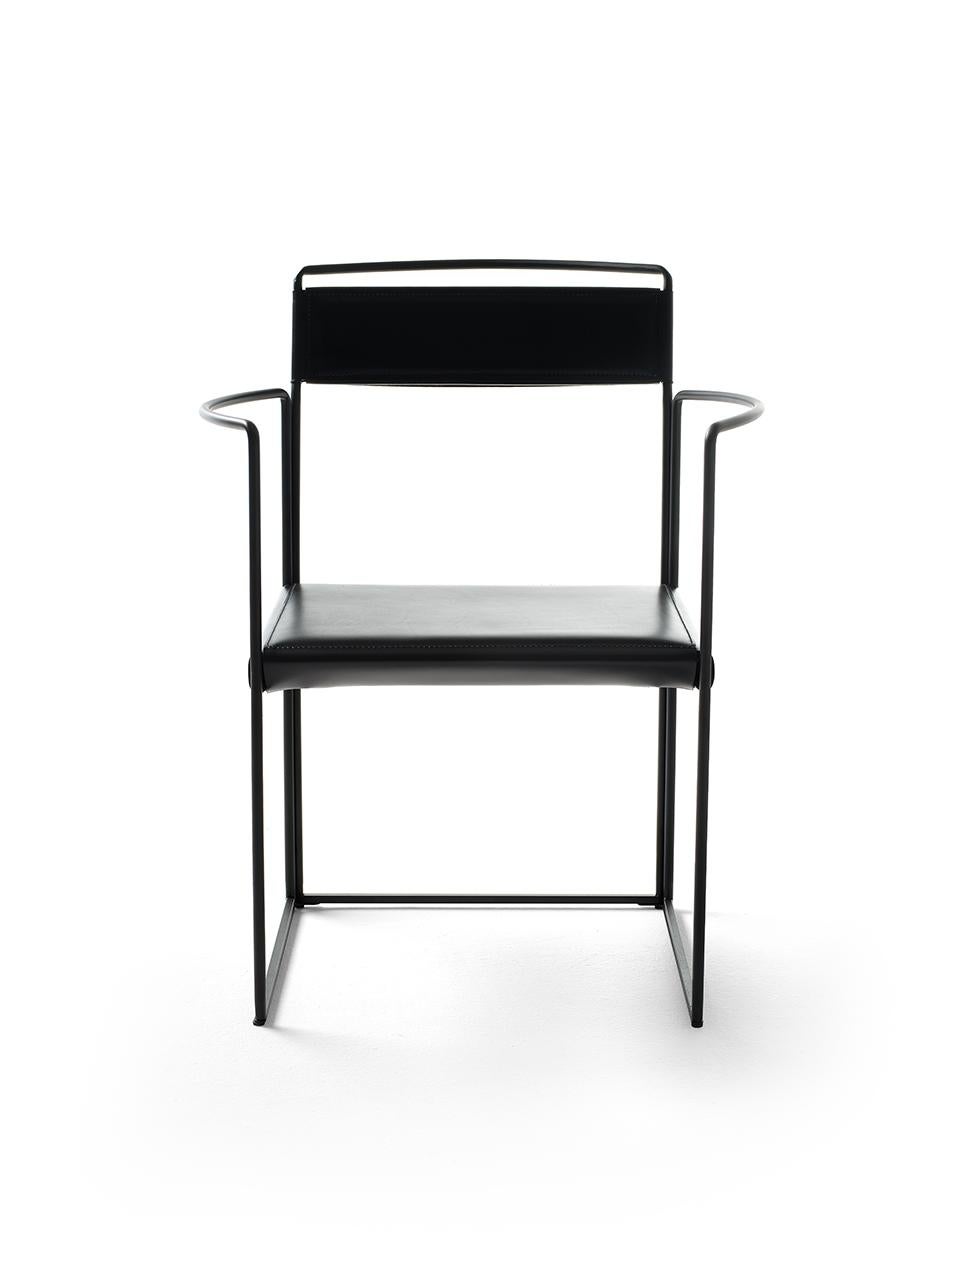 New outline was developed by maximizing the integration of form and function while using minimum material. The steel rod frames define a contour that is slender and light, becoming armrests and backrest as a simple and fluid line. The fully